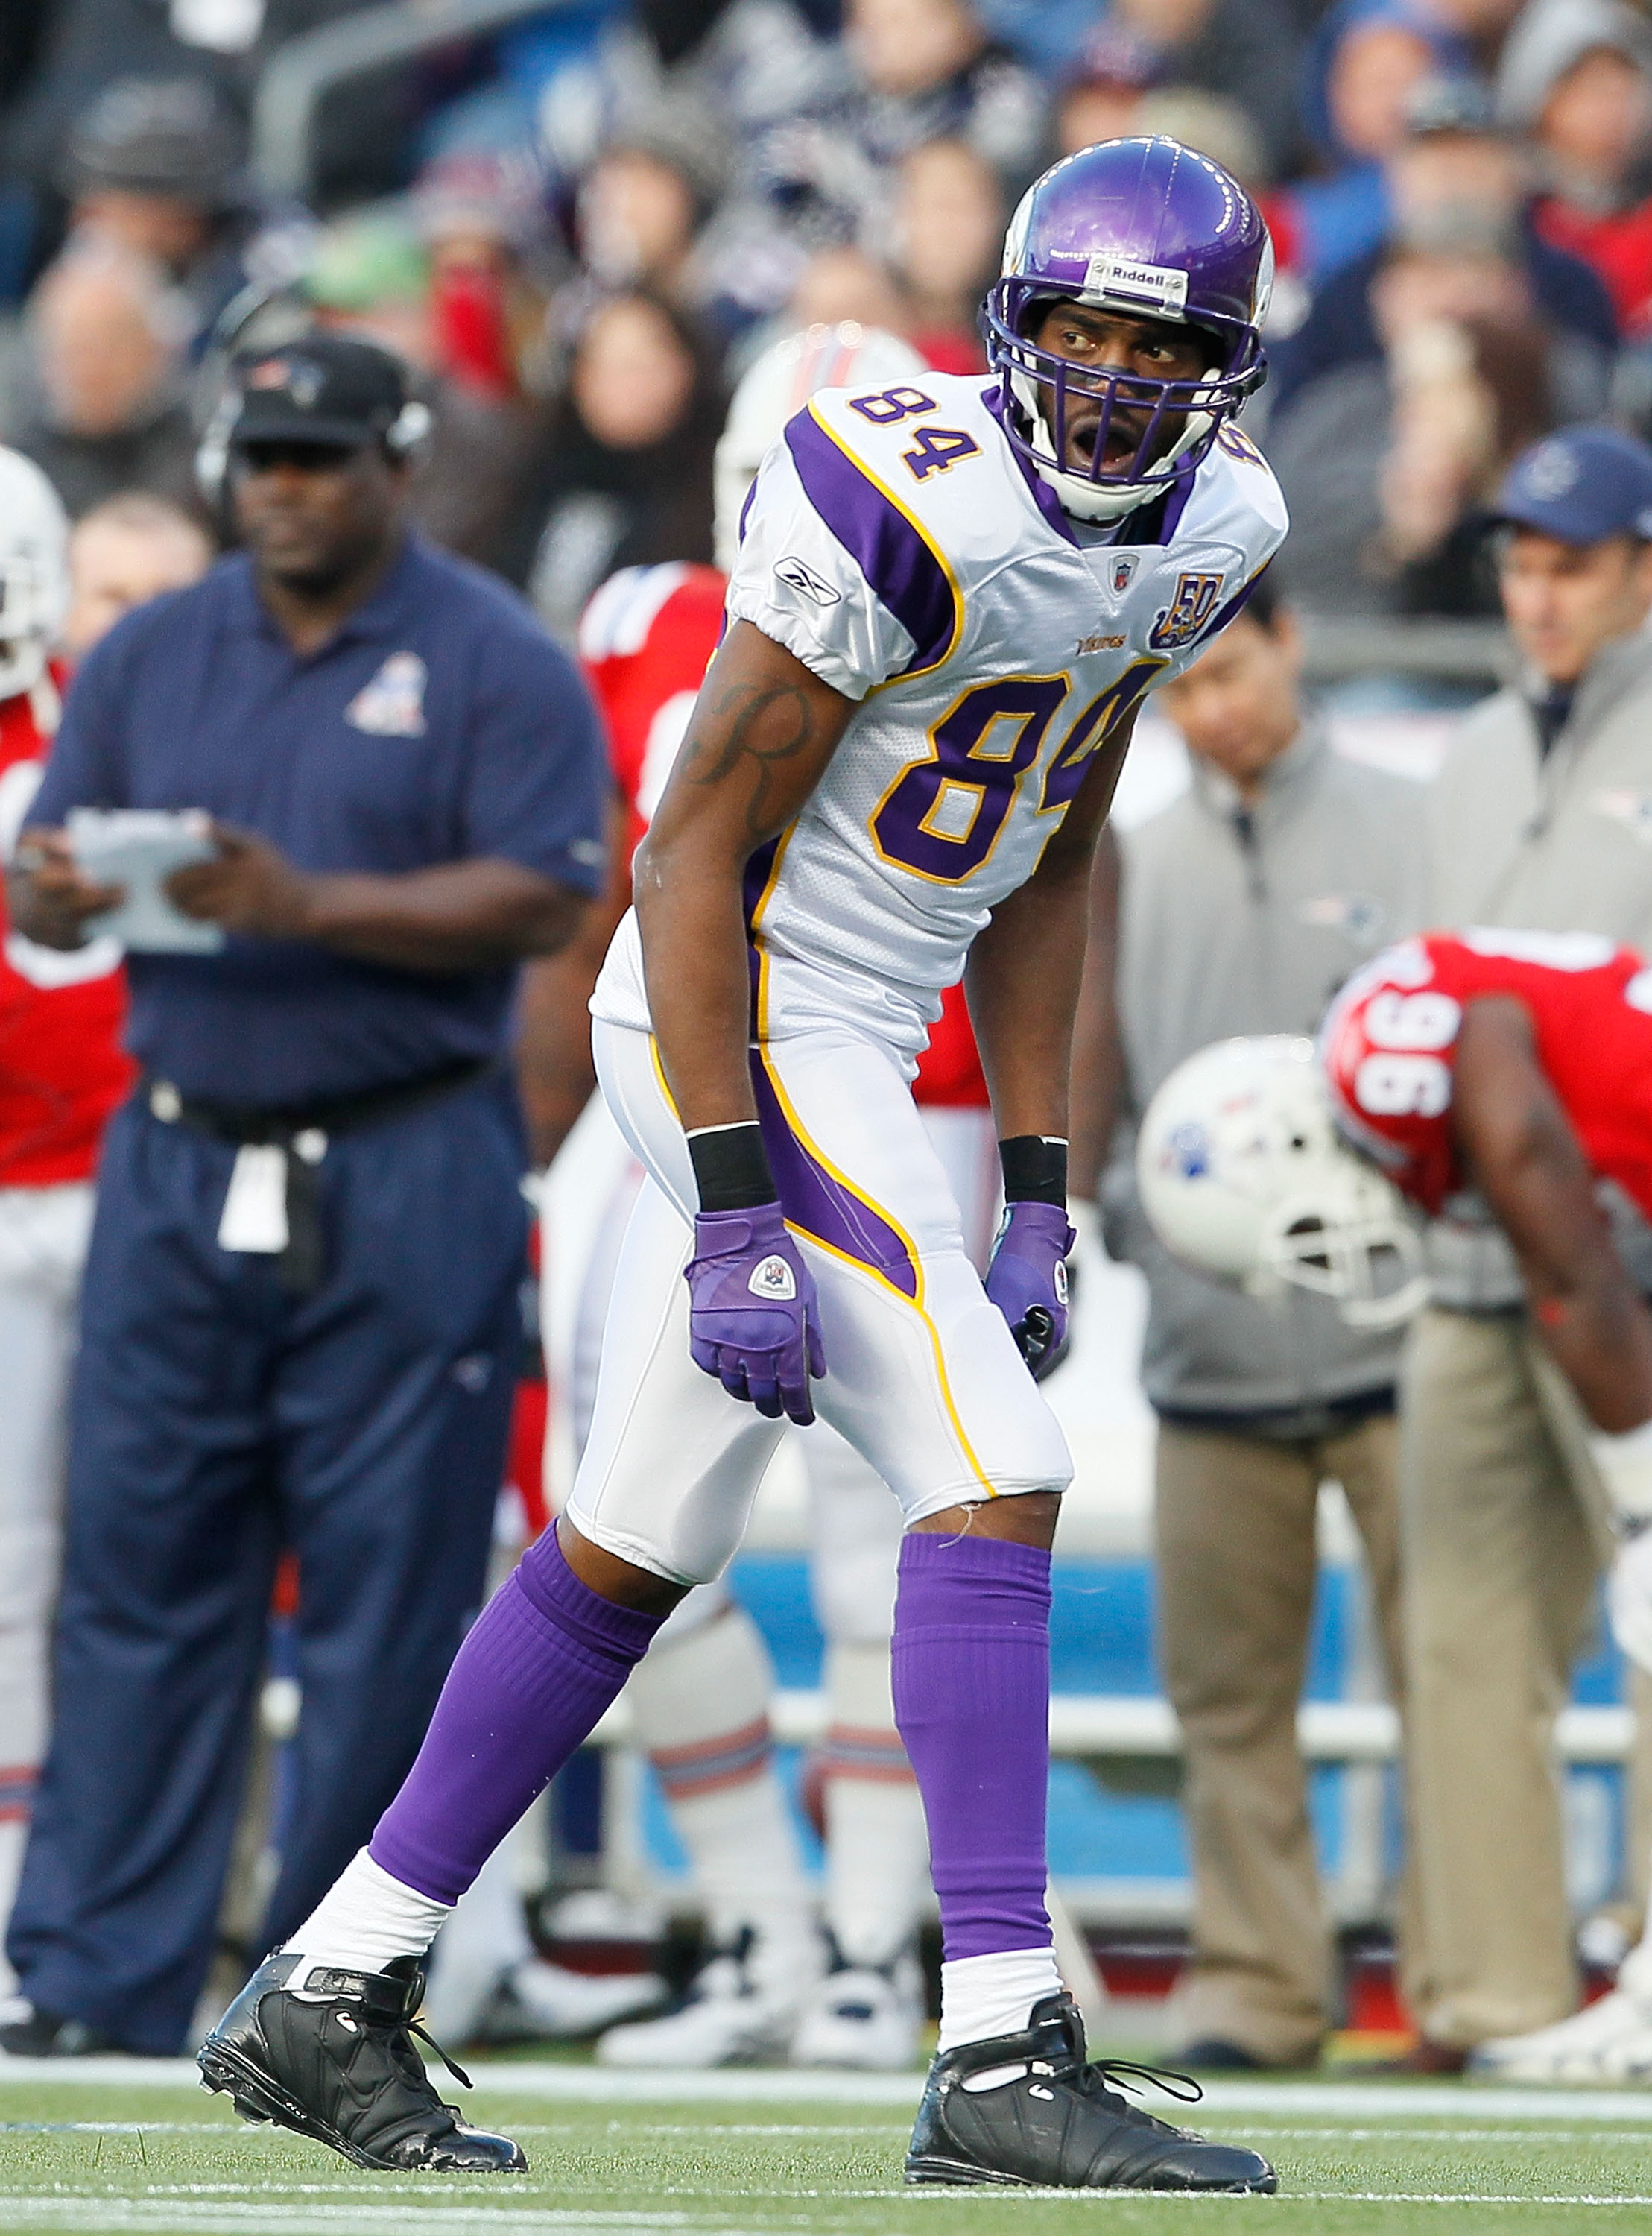 FOXBORO, MA - OCTOBER 31:  Randy Moss #84 of the Minnesota Vikings lines up against the New England Patriots at Gillette Stadium on October 31, 2010 in Foxboro, Massachusetts. (Photo by Jim Rogash/Getty Images)